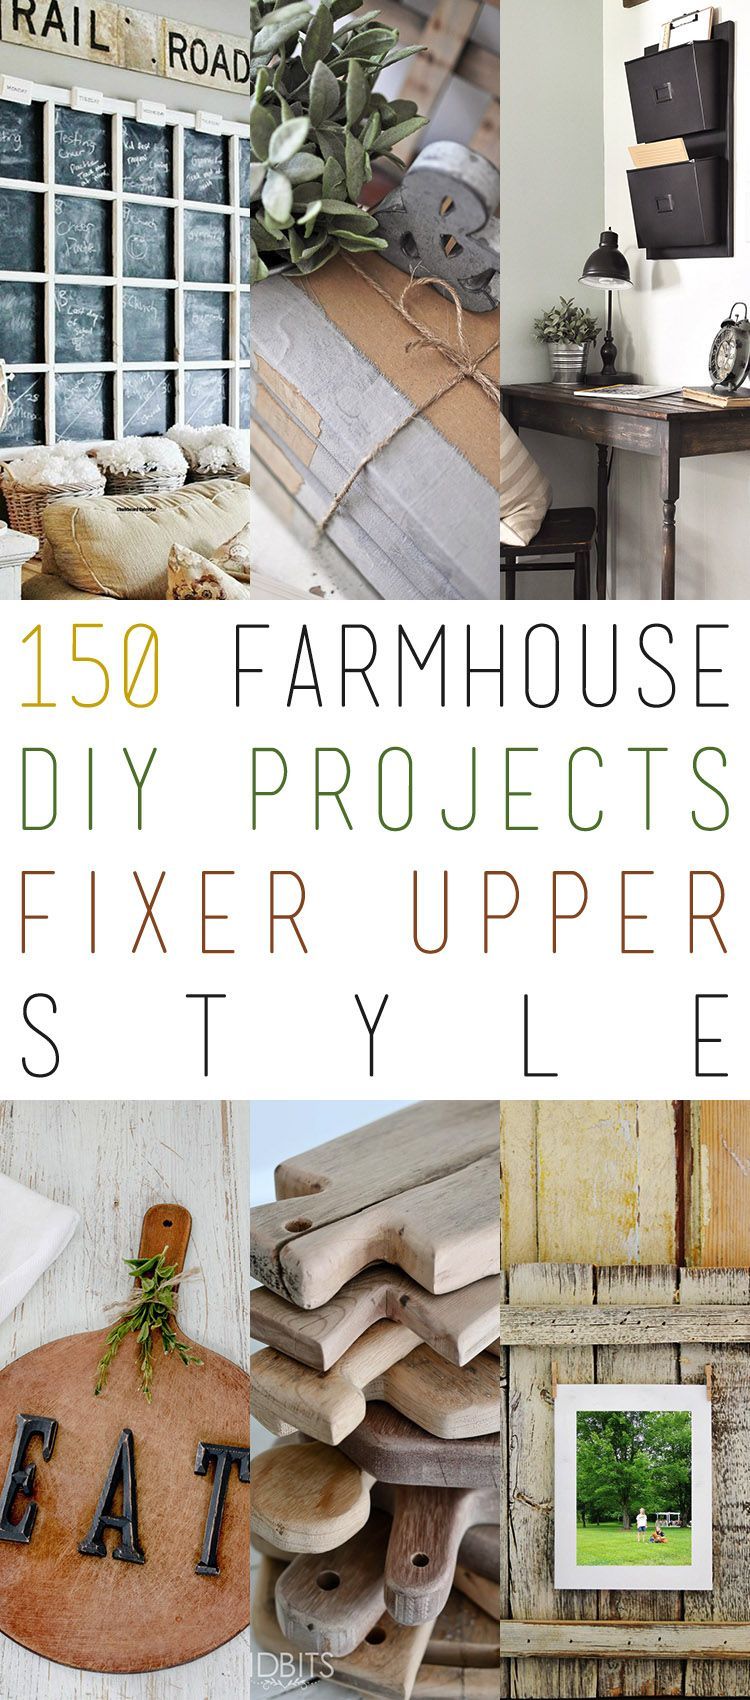 150 Farmhouse DIY Projects Fixer Upper Style - The Cottage Market -   19 diy projects For The Home room ideas